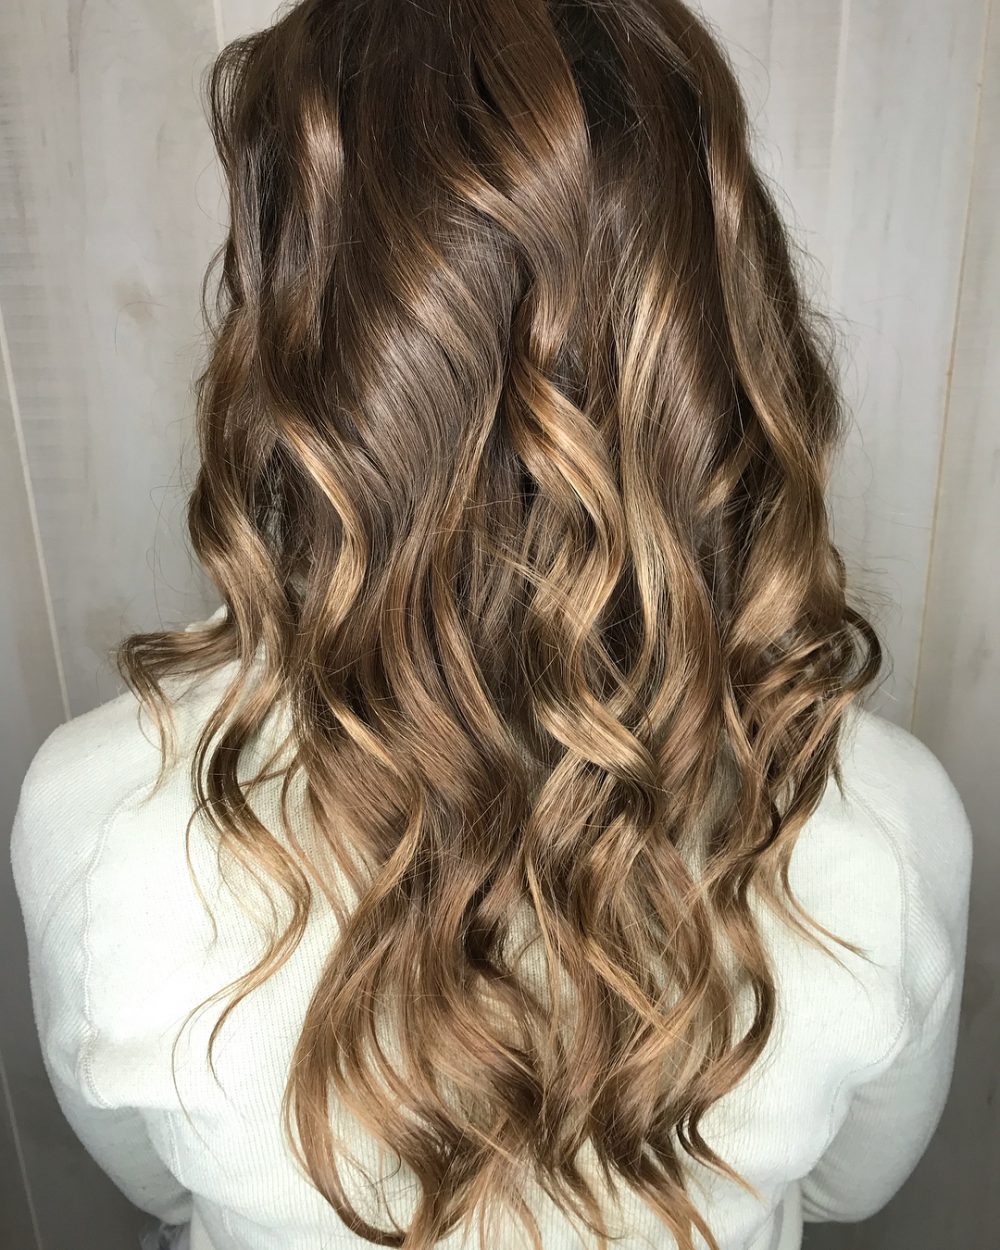 Long Curled Hairstyle With Lowlights